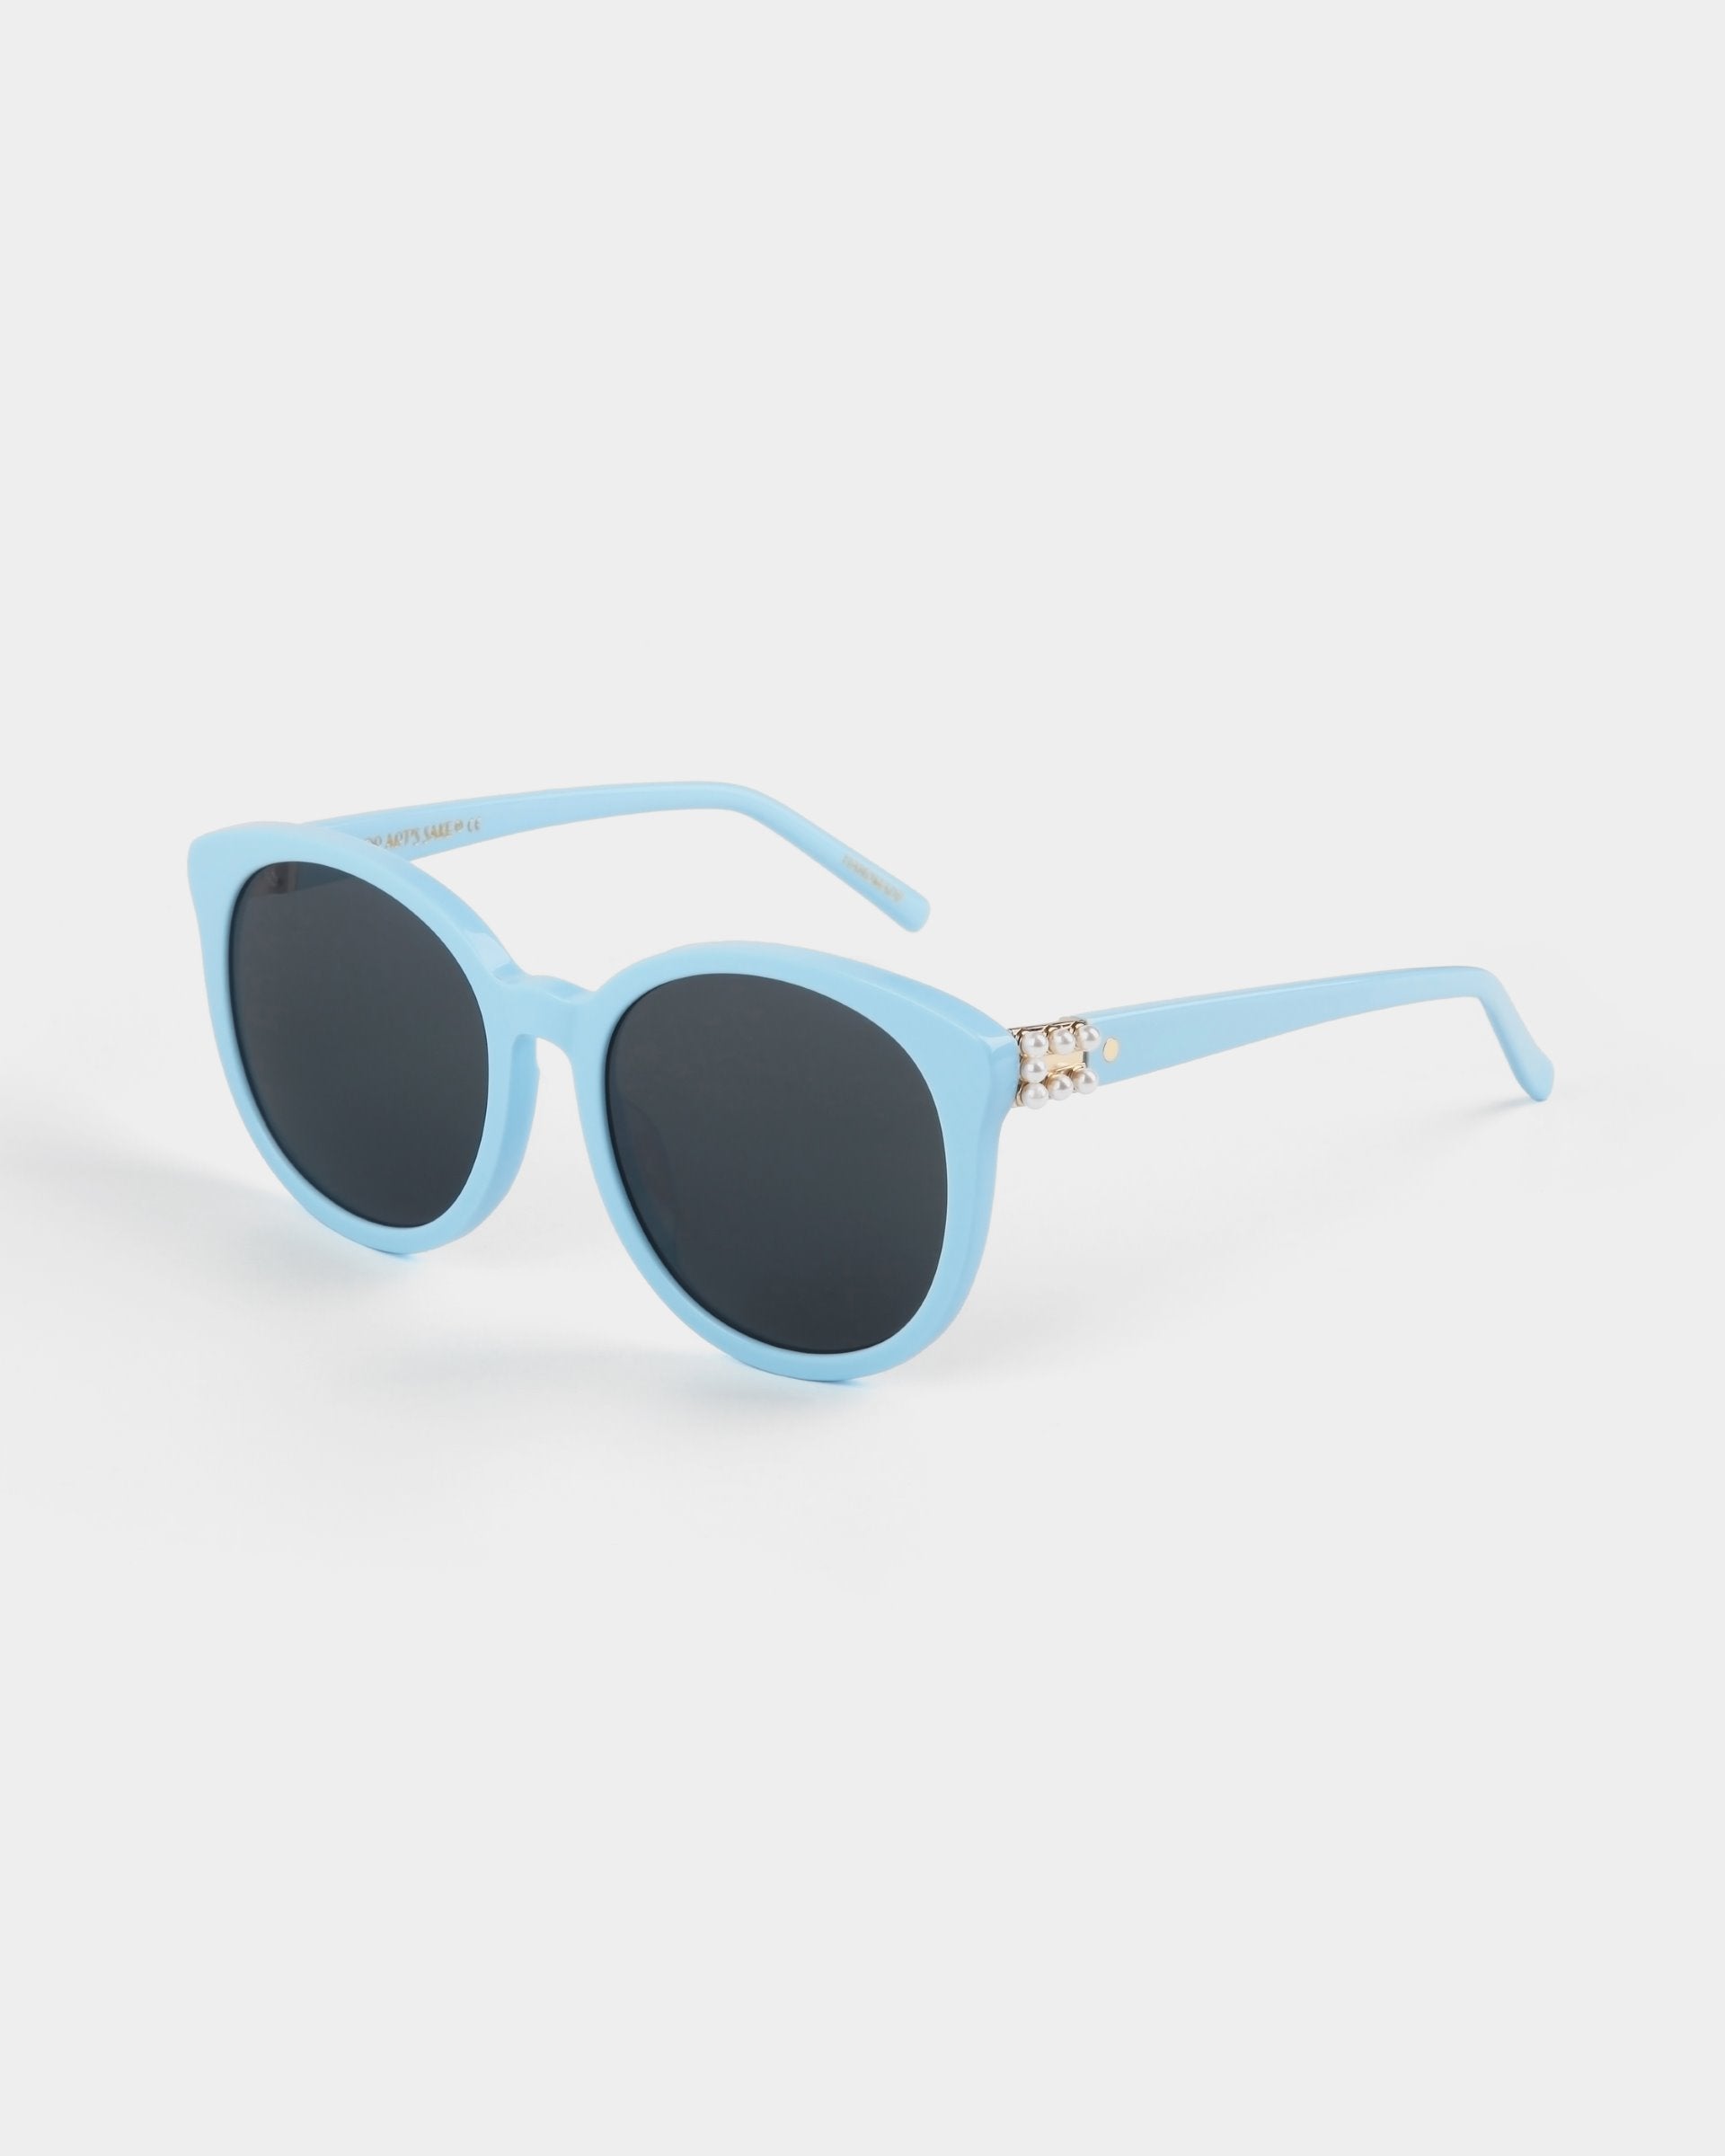 Light blue Scarlett frames with round, dark, shatter-resistant nylon lenses are pictured on a white background. The For Art&#39;s Sake® Scarlett sunglasses have a slight cat-eye shape and feature a small decorative gold element on the arms near the UVA &amp; UVB-protected lenses.